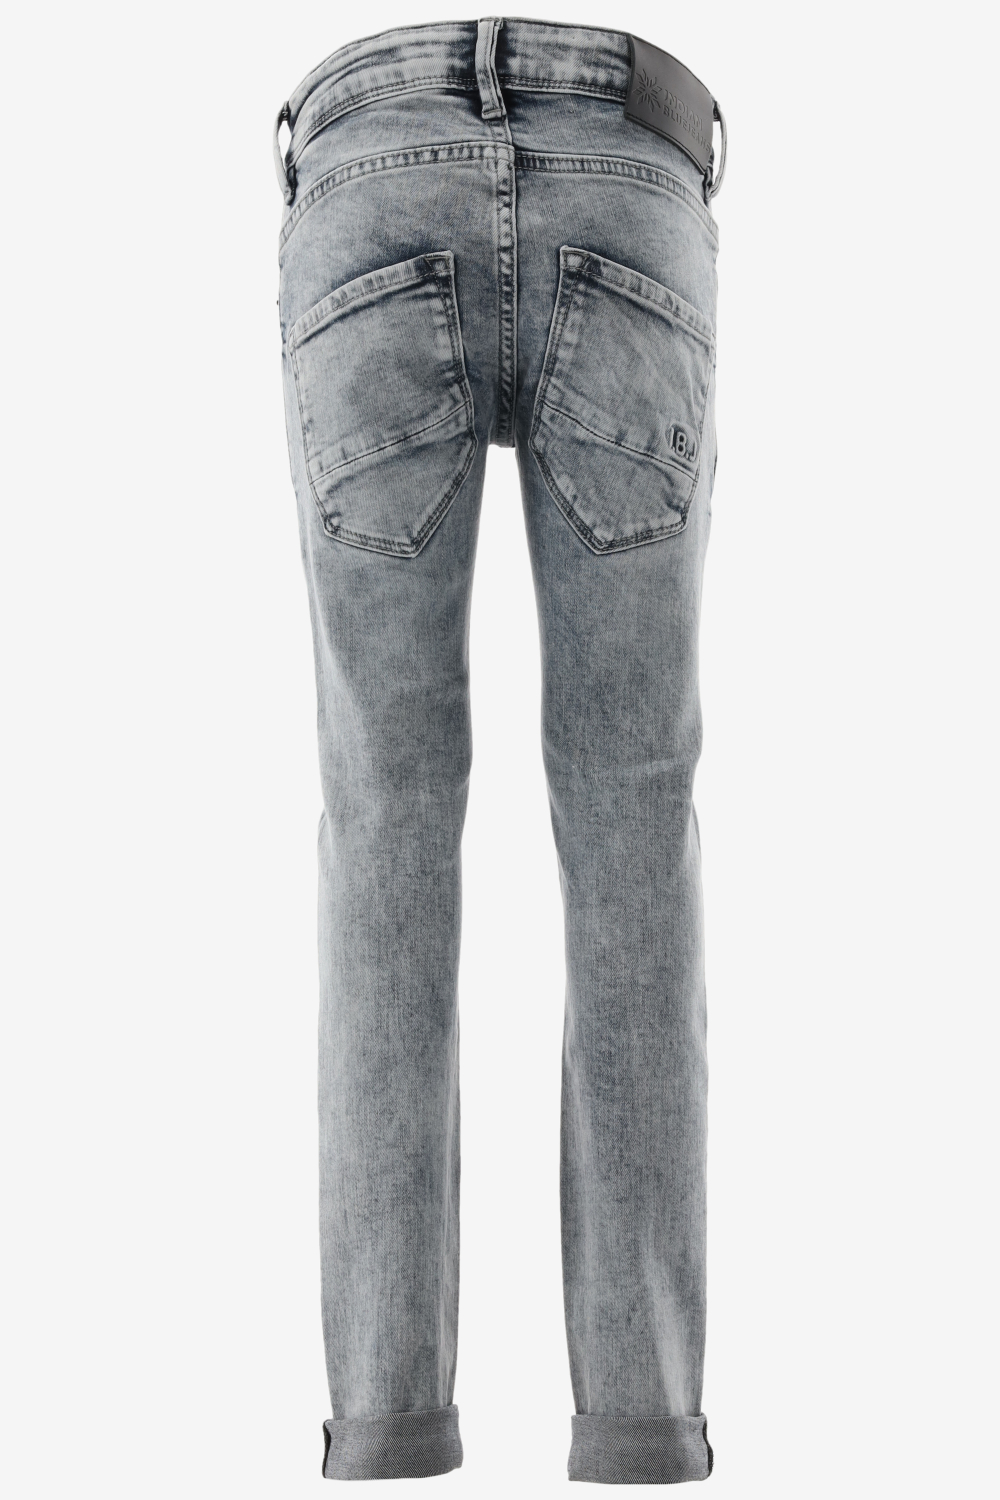 Indian Blue Skinny Fit 